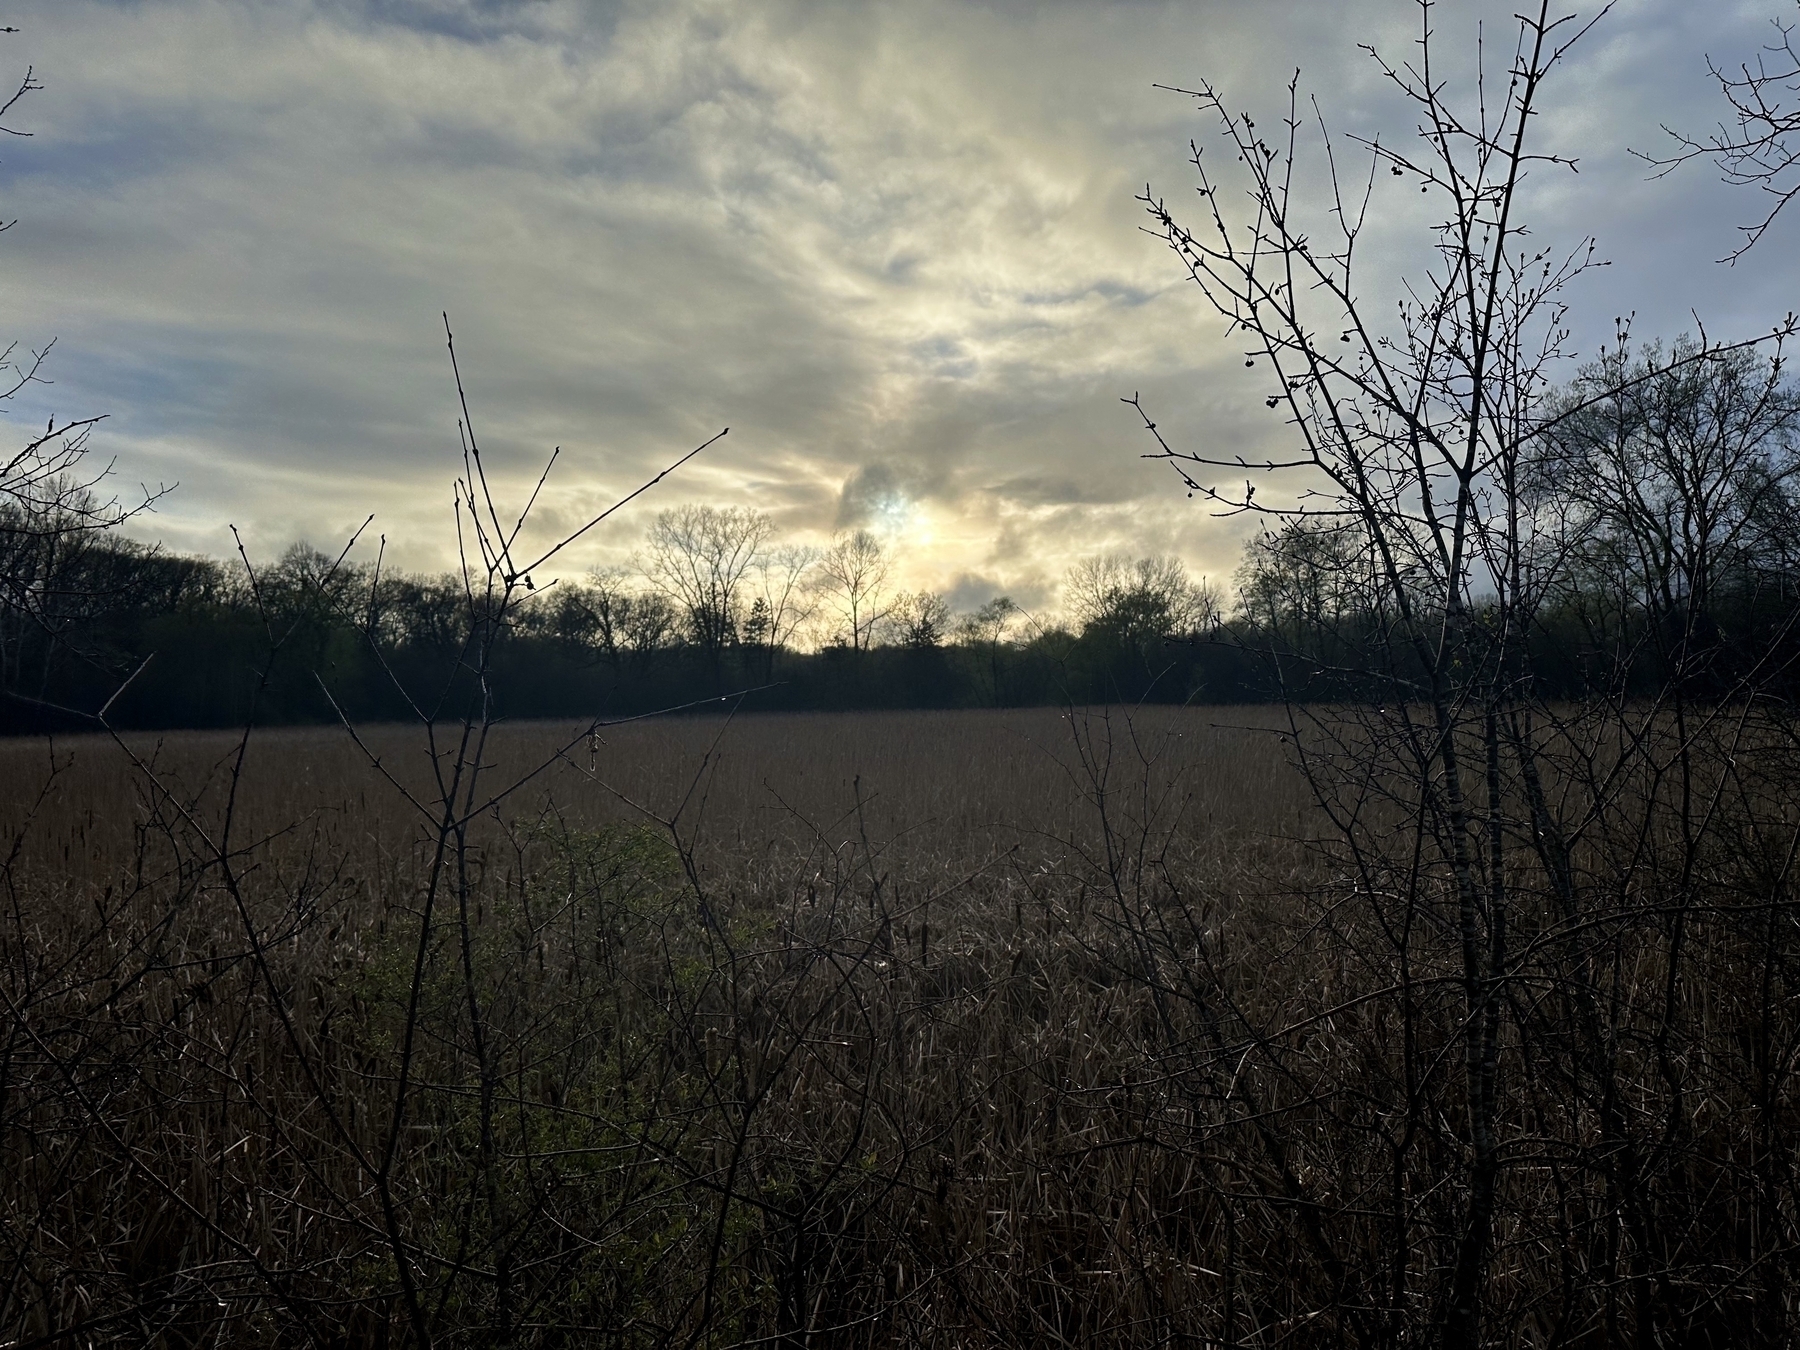 Bare trees frame a field with tall, dry grass under a moody sky, where the sun partially breaks through clouds.